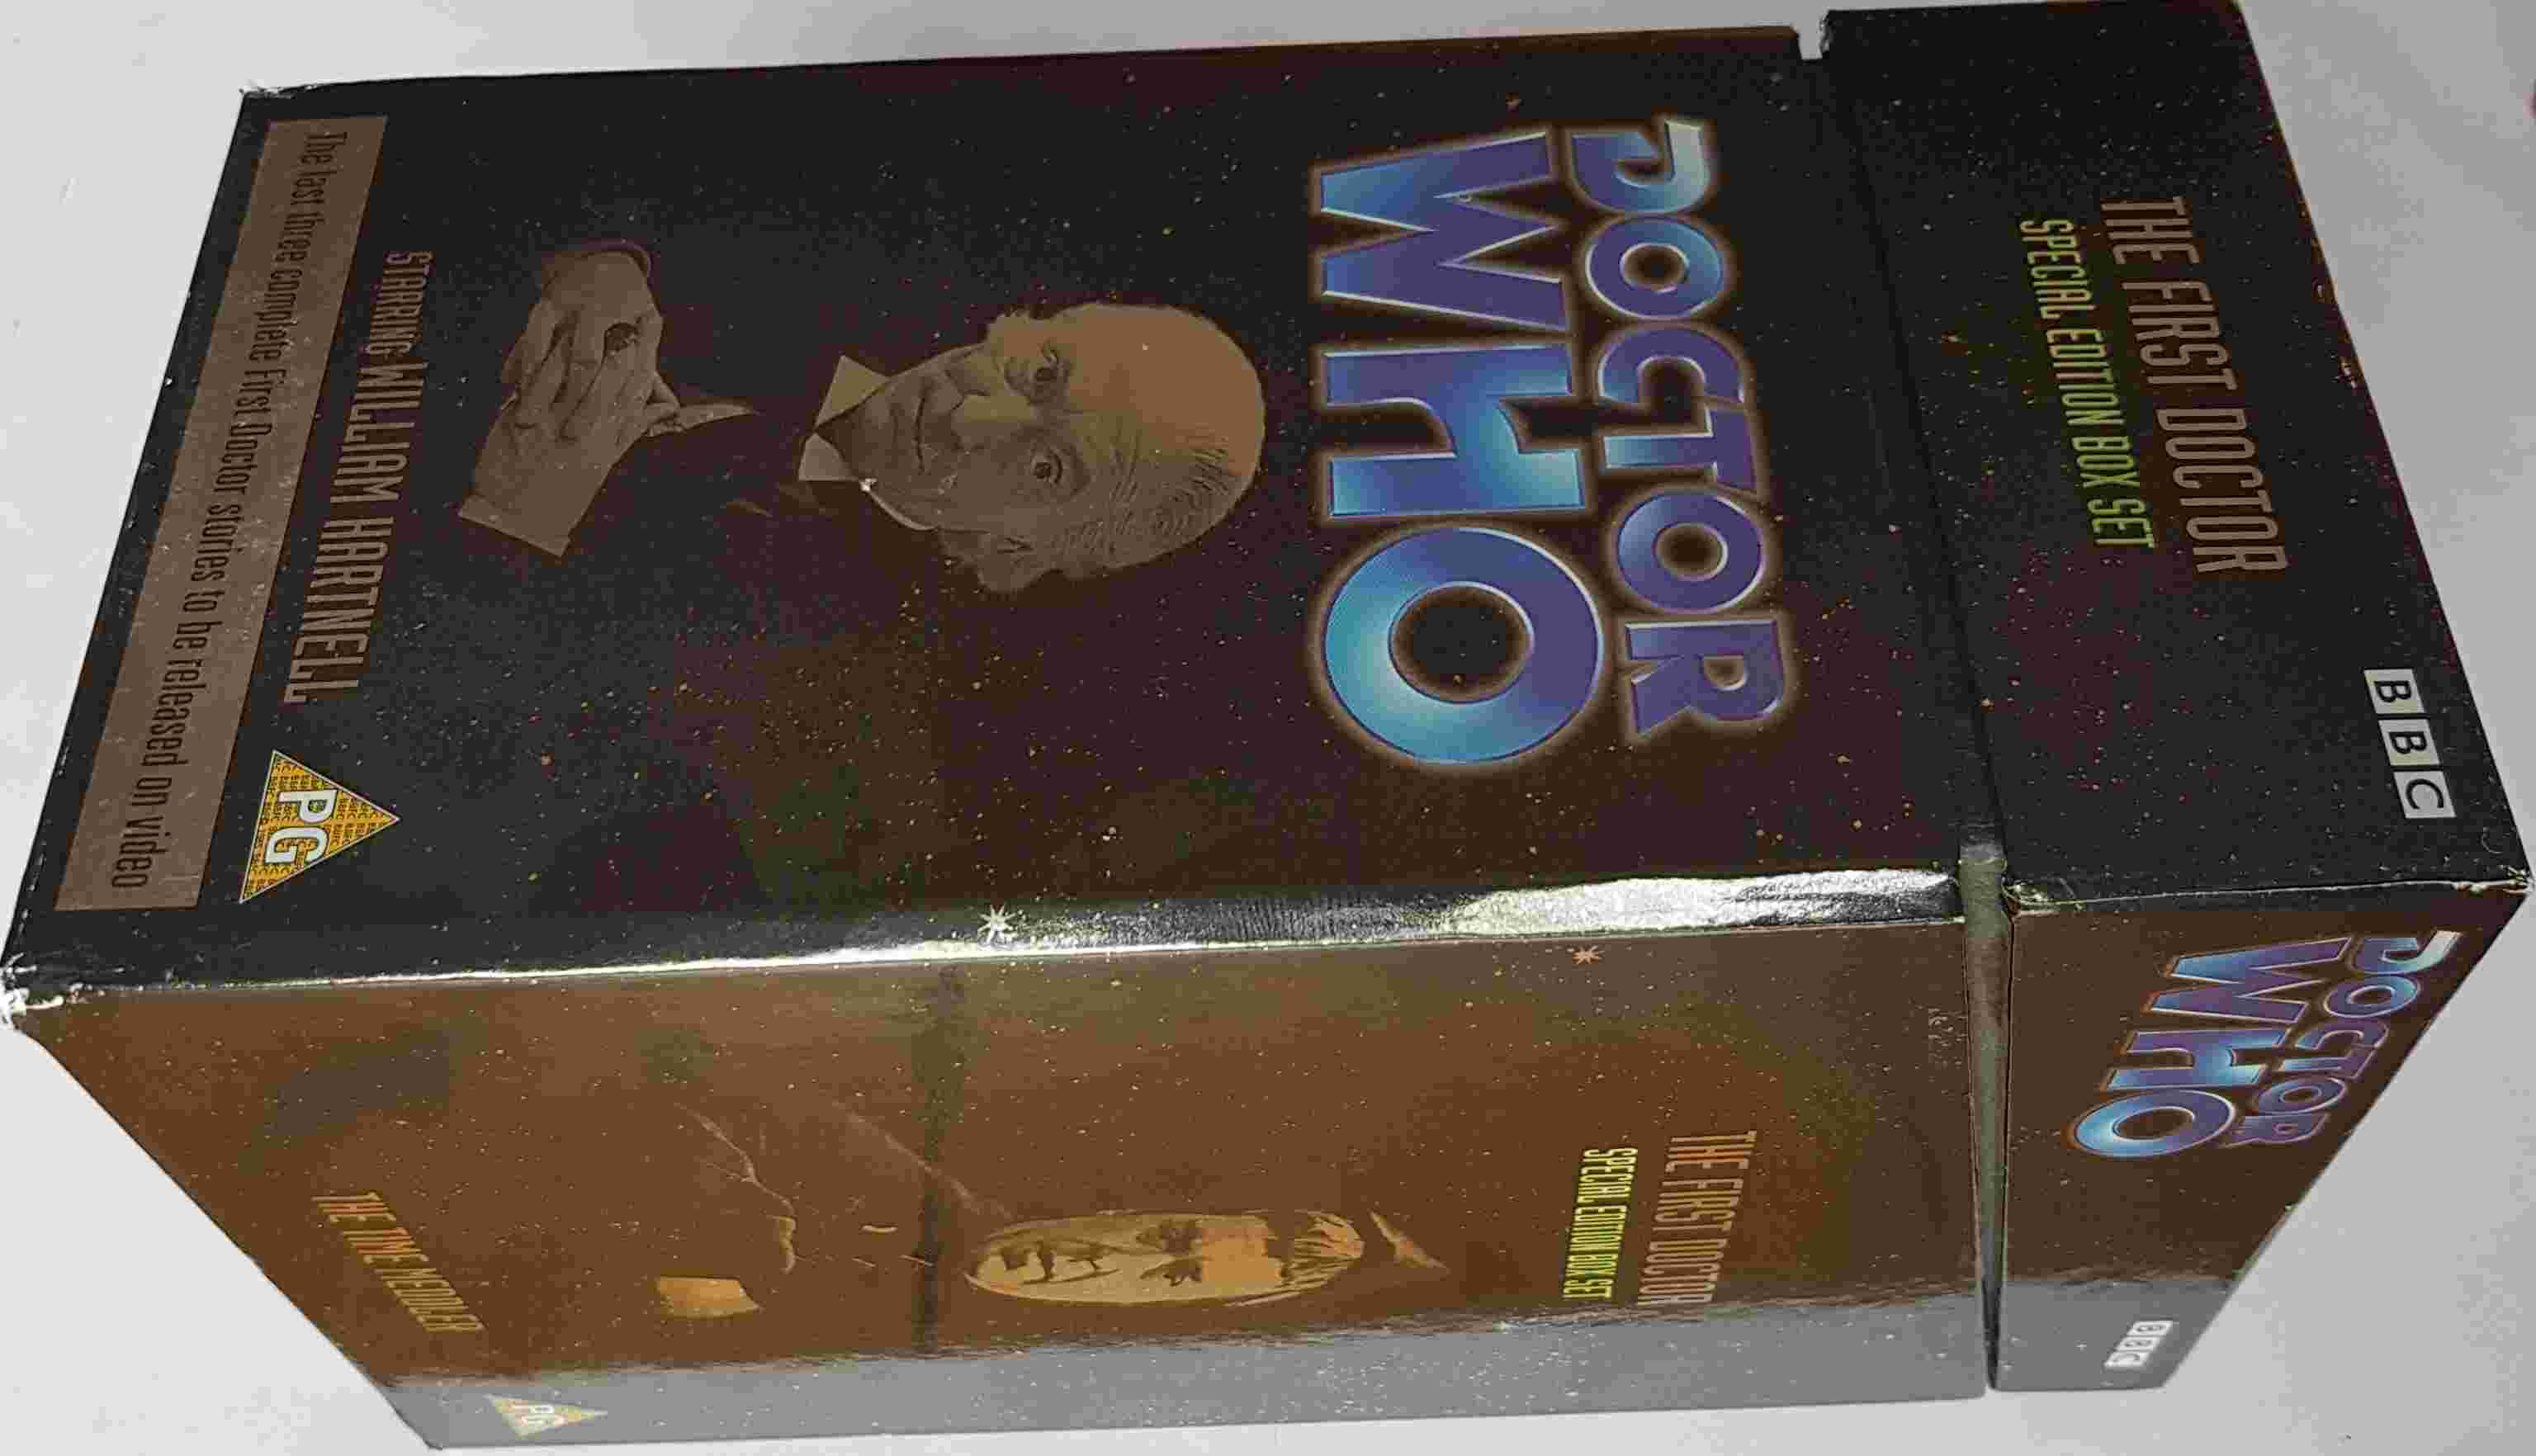 Picture of BBCV 7268 Doctor Who - The first doctor - Special edition boxed set by artist Peter R. Newman / Dennis Spooner / Donald Cotton from the BBC records and Tapes library